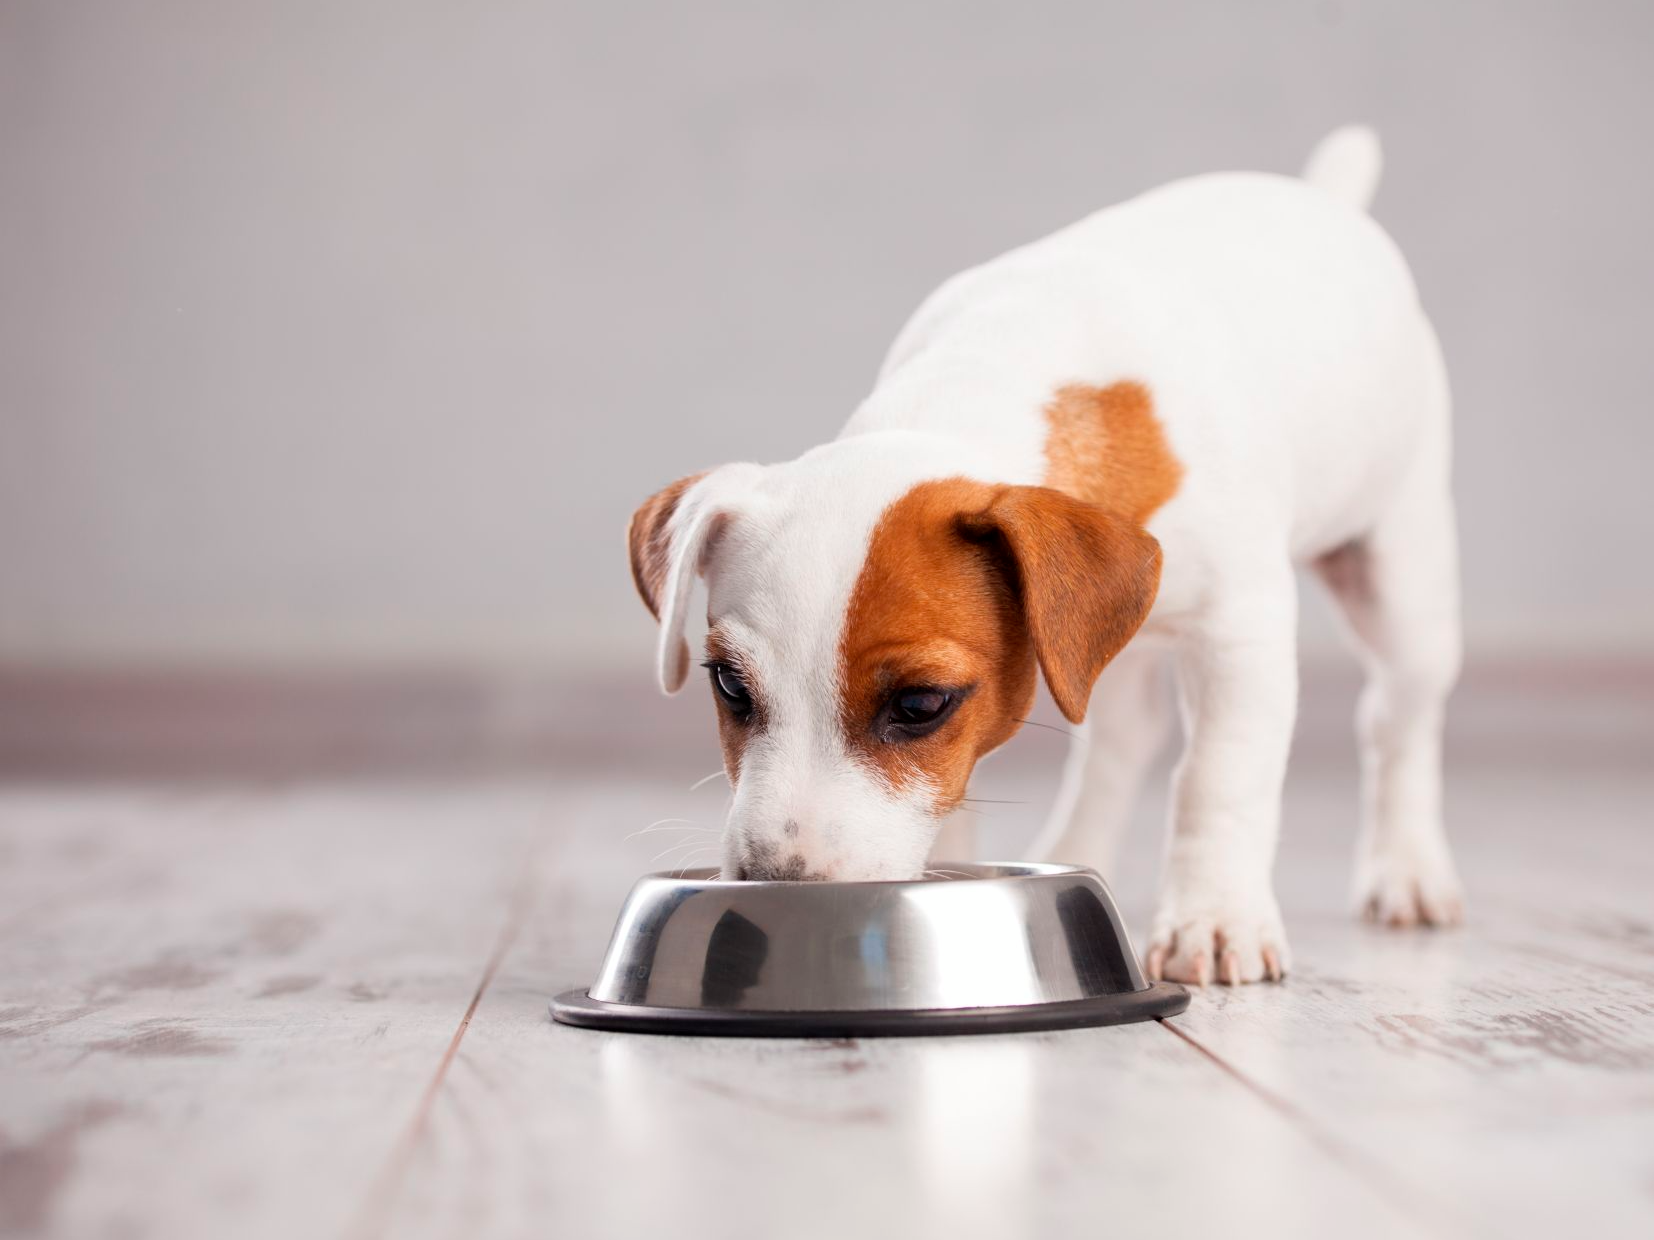 white Russell terrier dog eats from a bowl